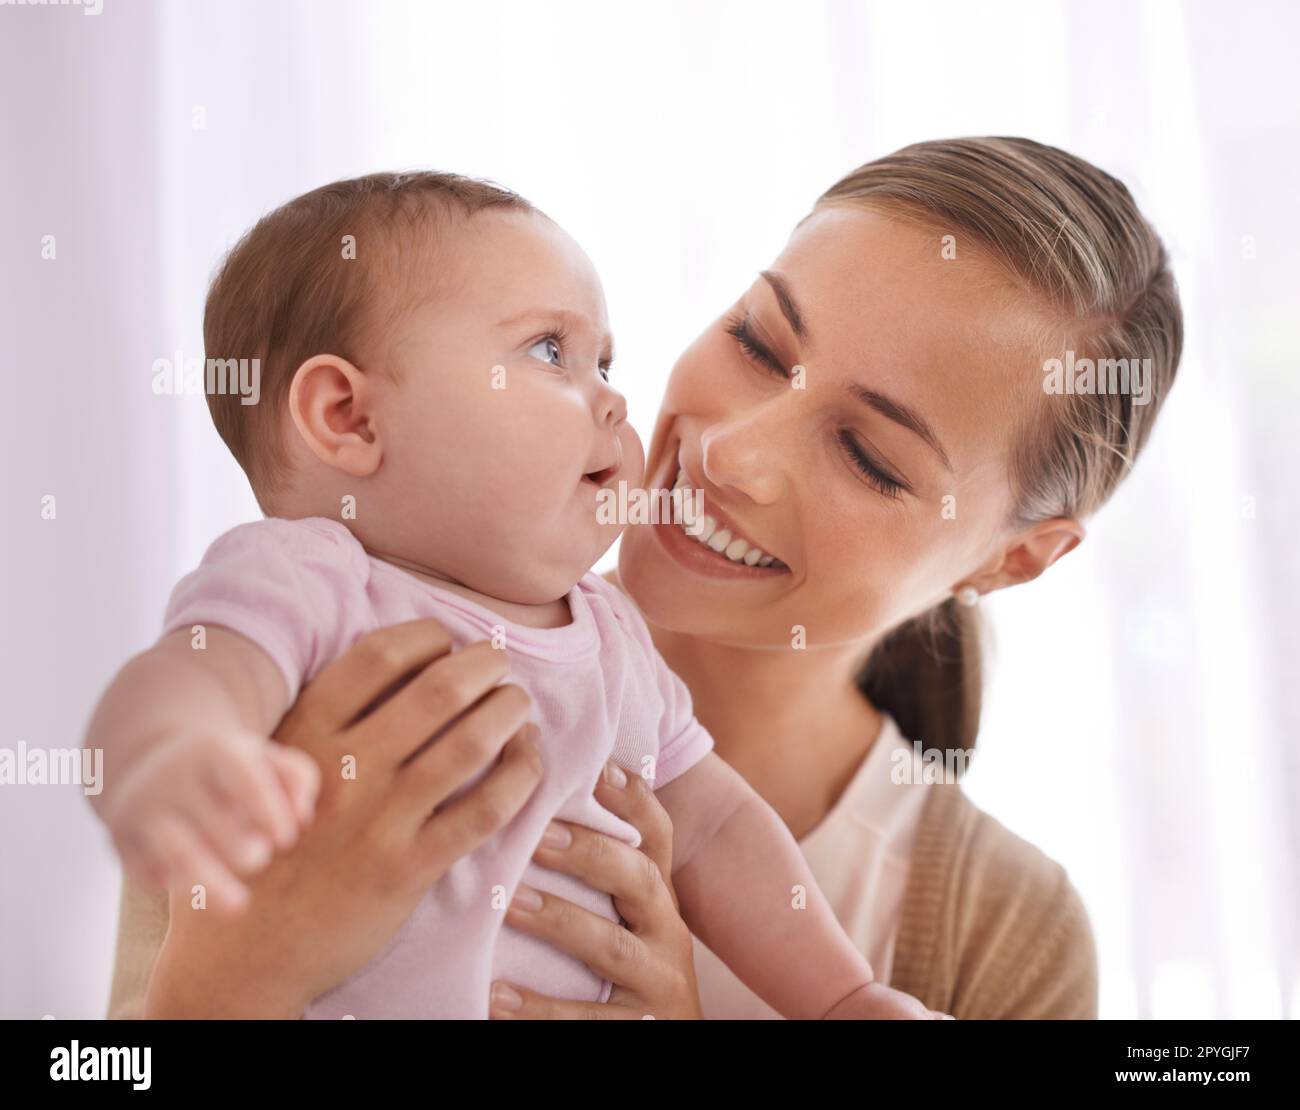 Shes my little angel. a young mother bonding with her baby girl. Stock Photo